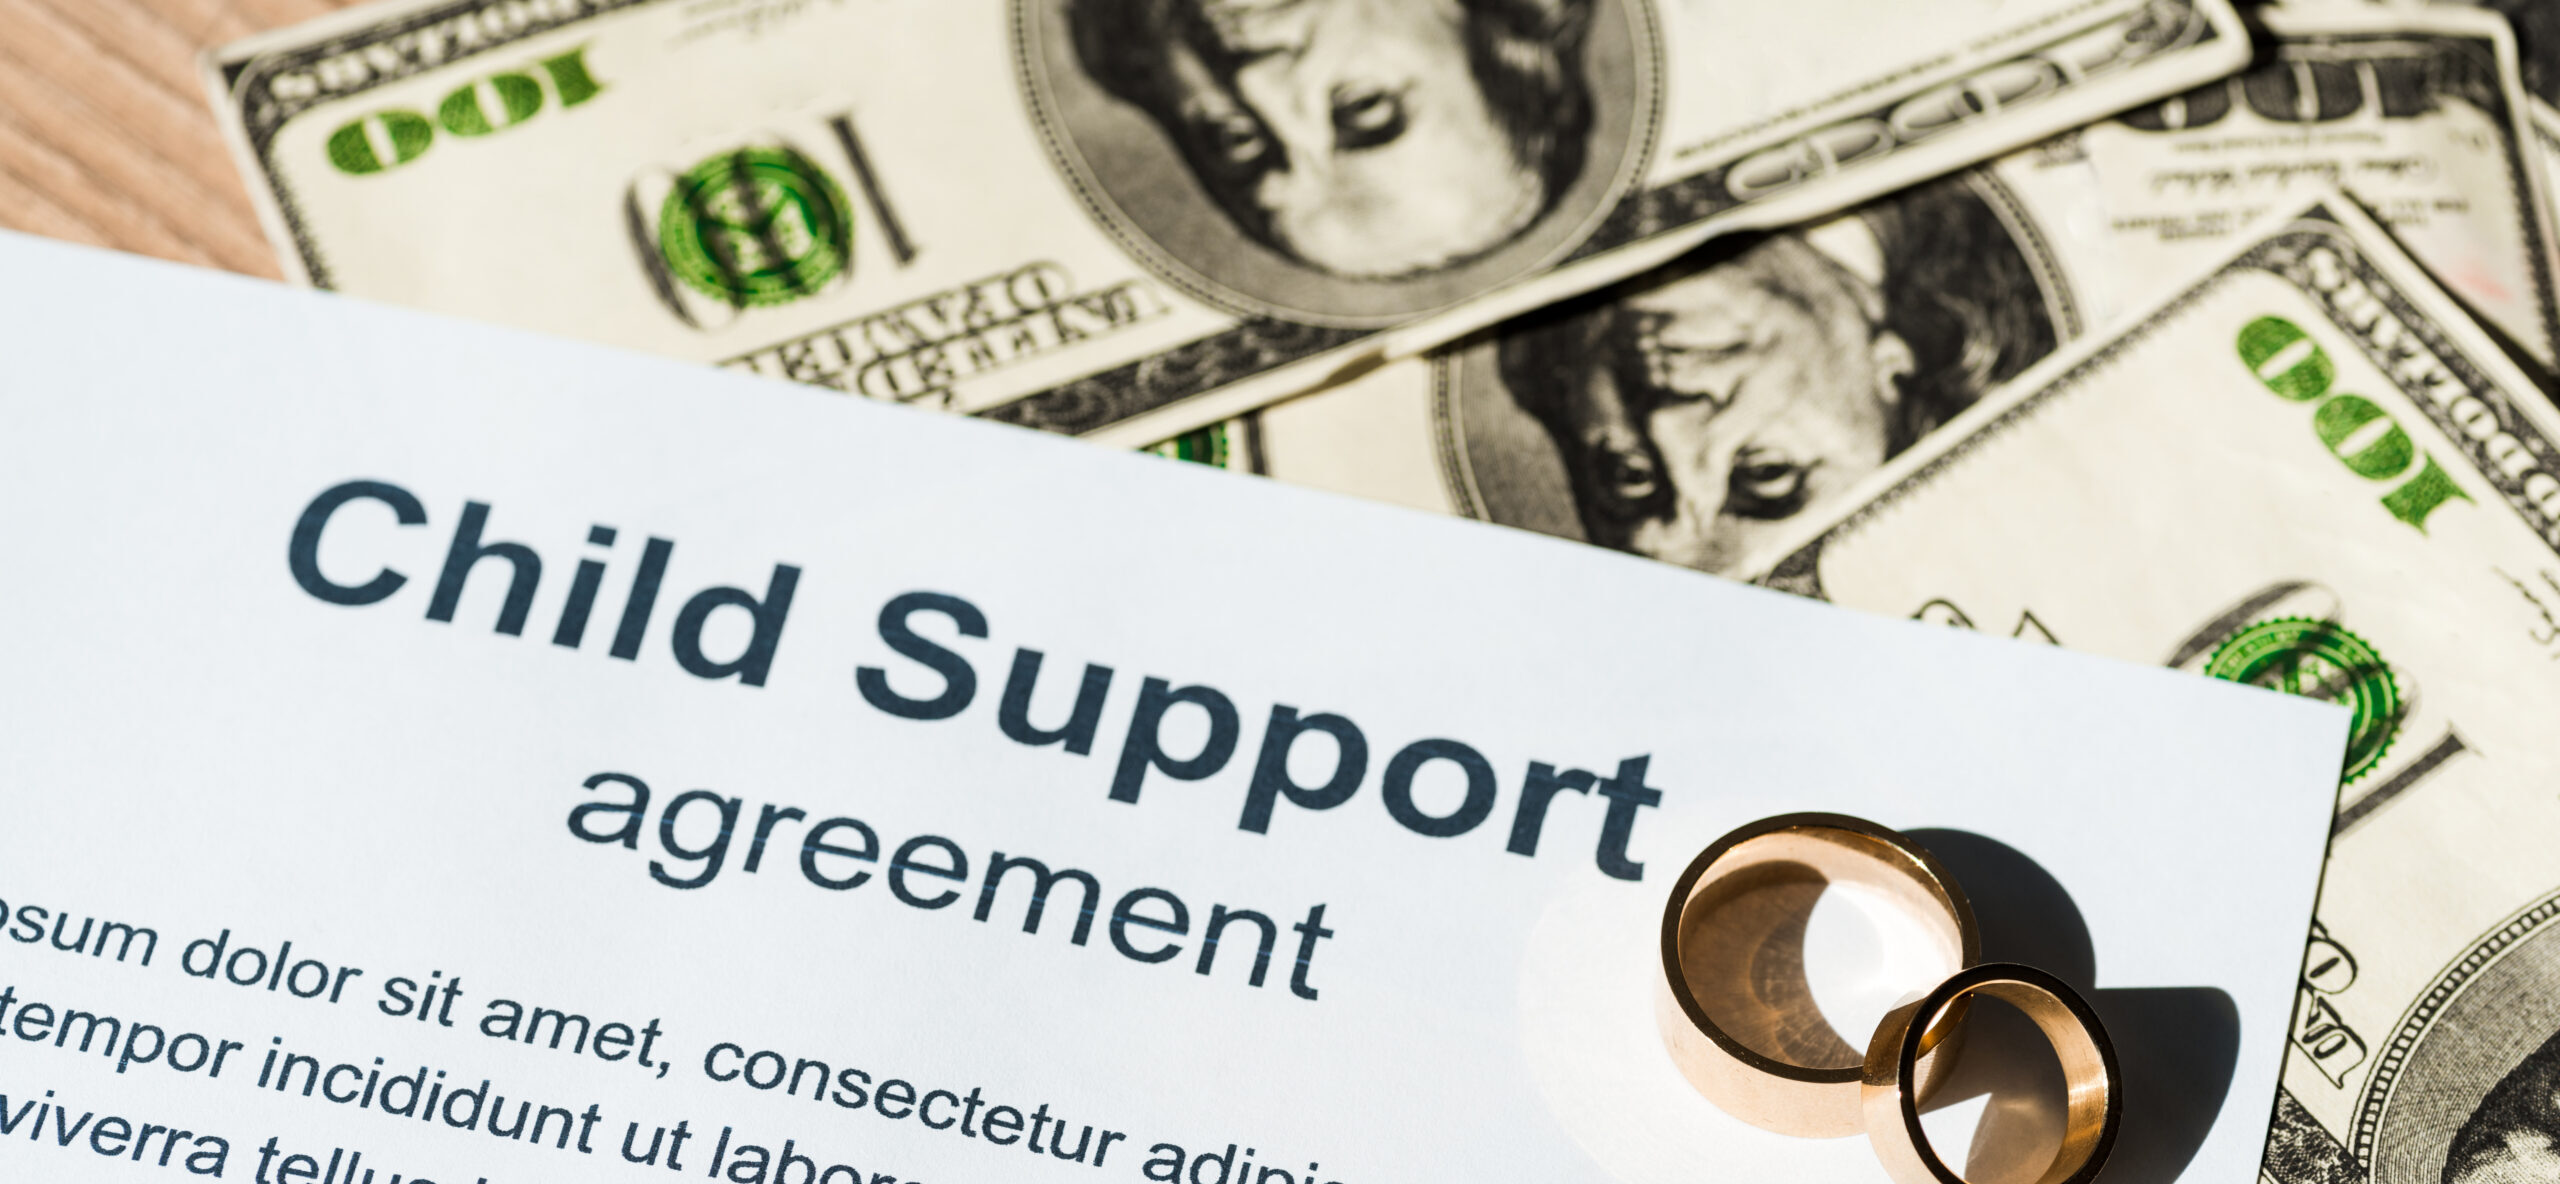 How is Child Support Calculated in Oklahoma?